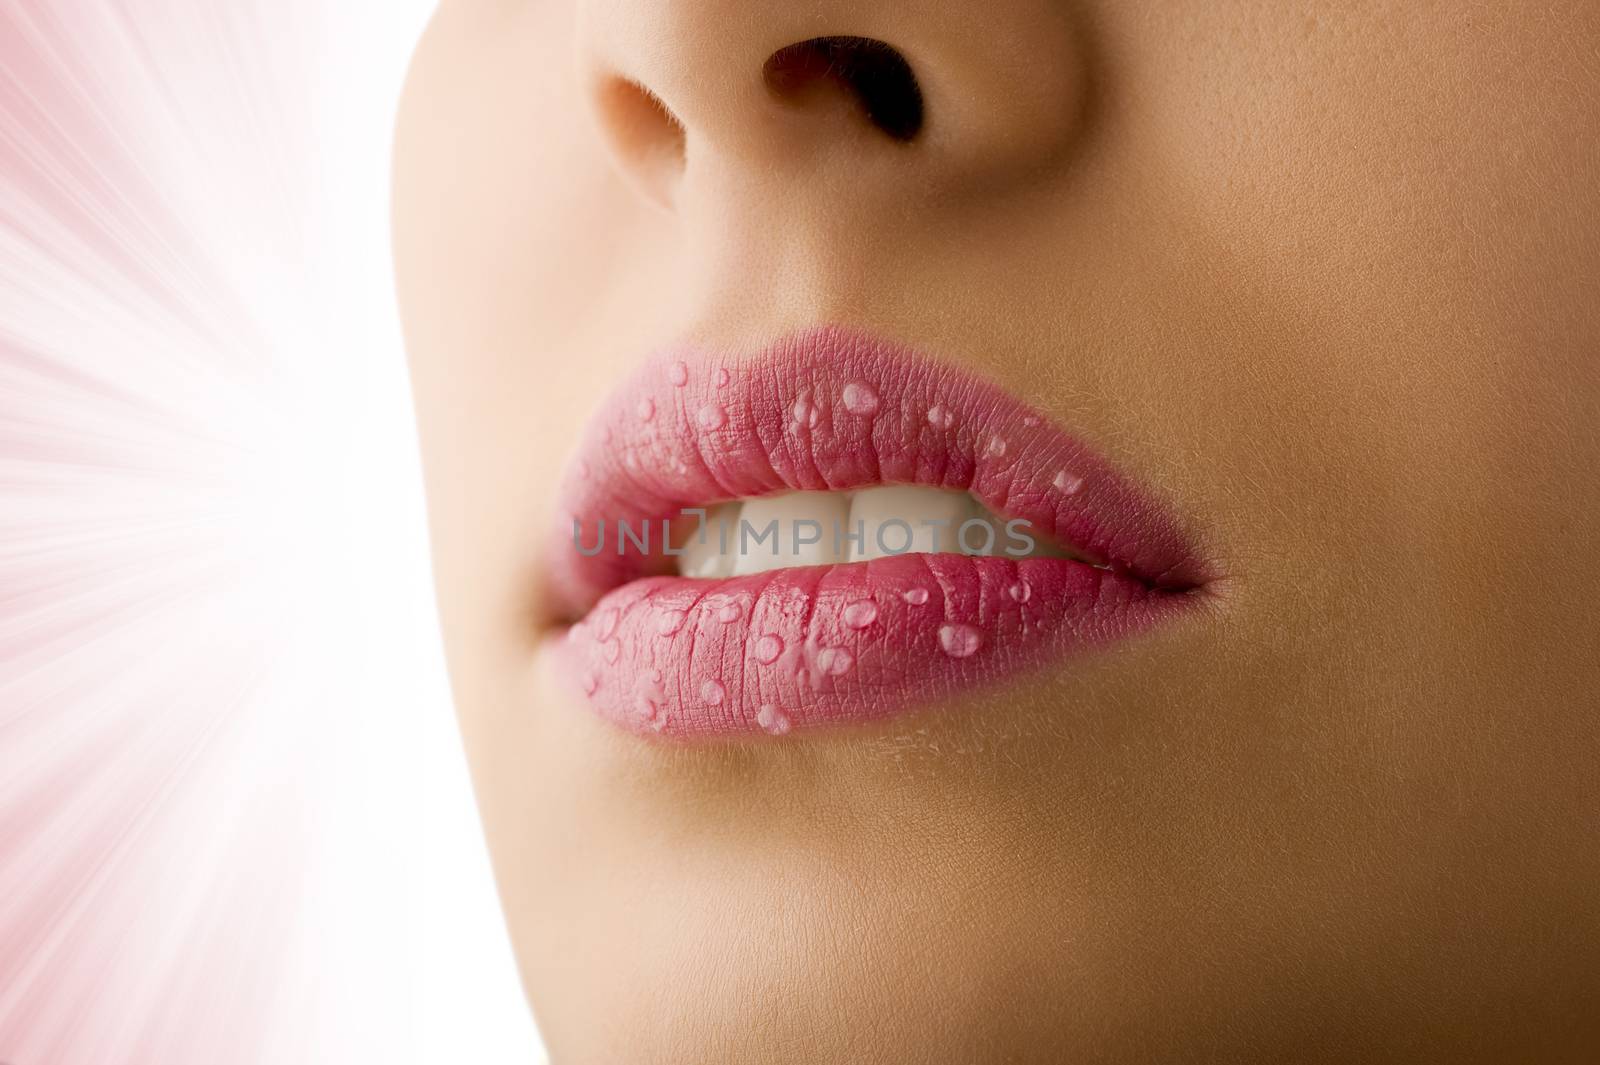 close up of woman mouth with pink lipstick and water drops on her lips